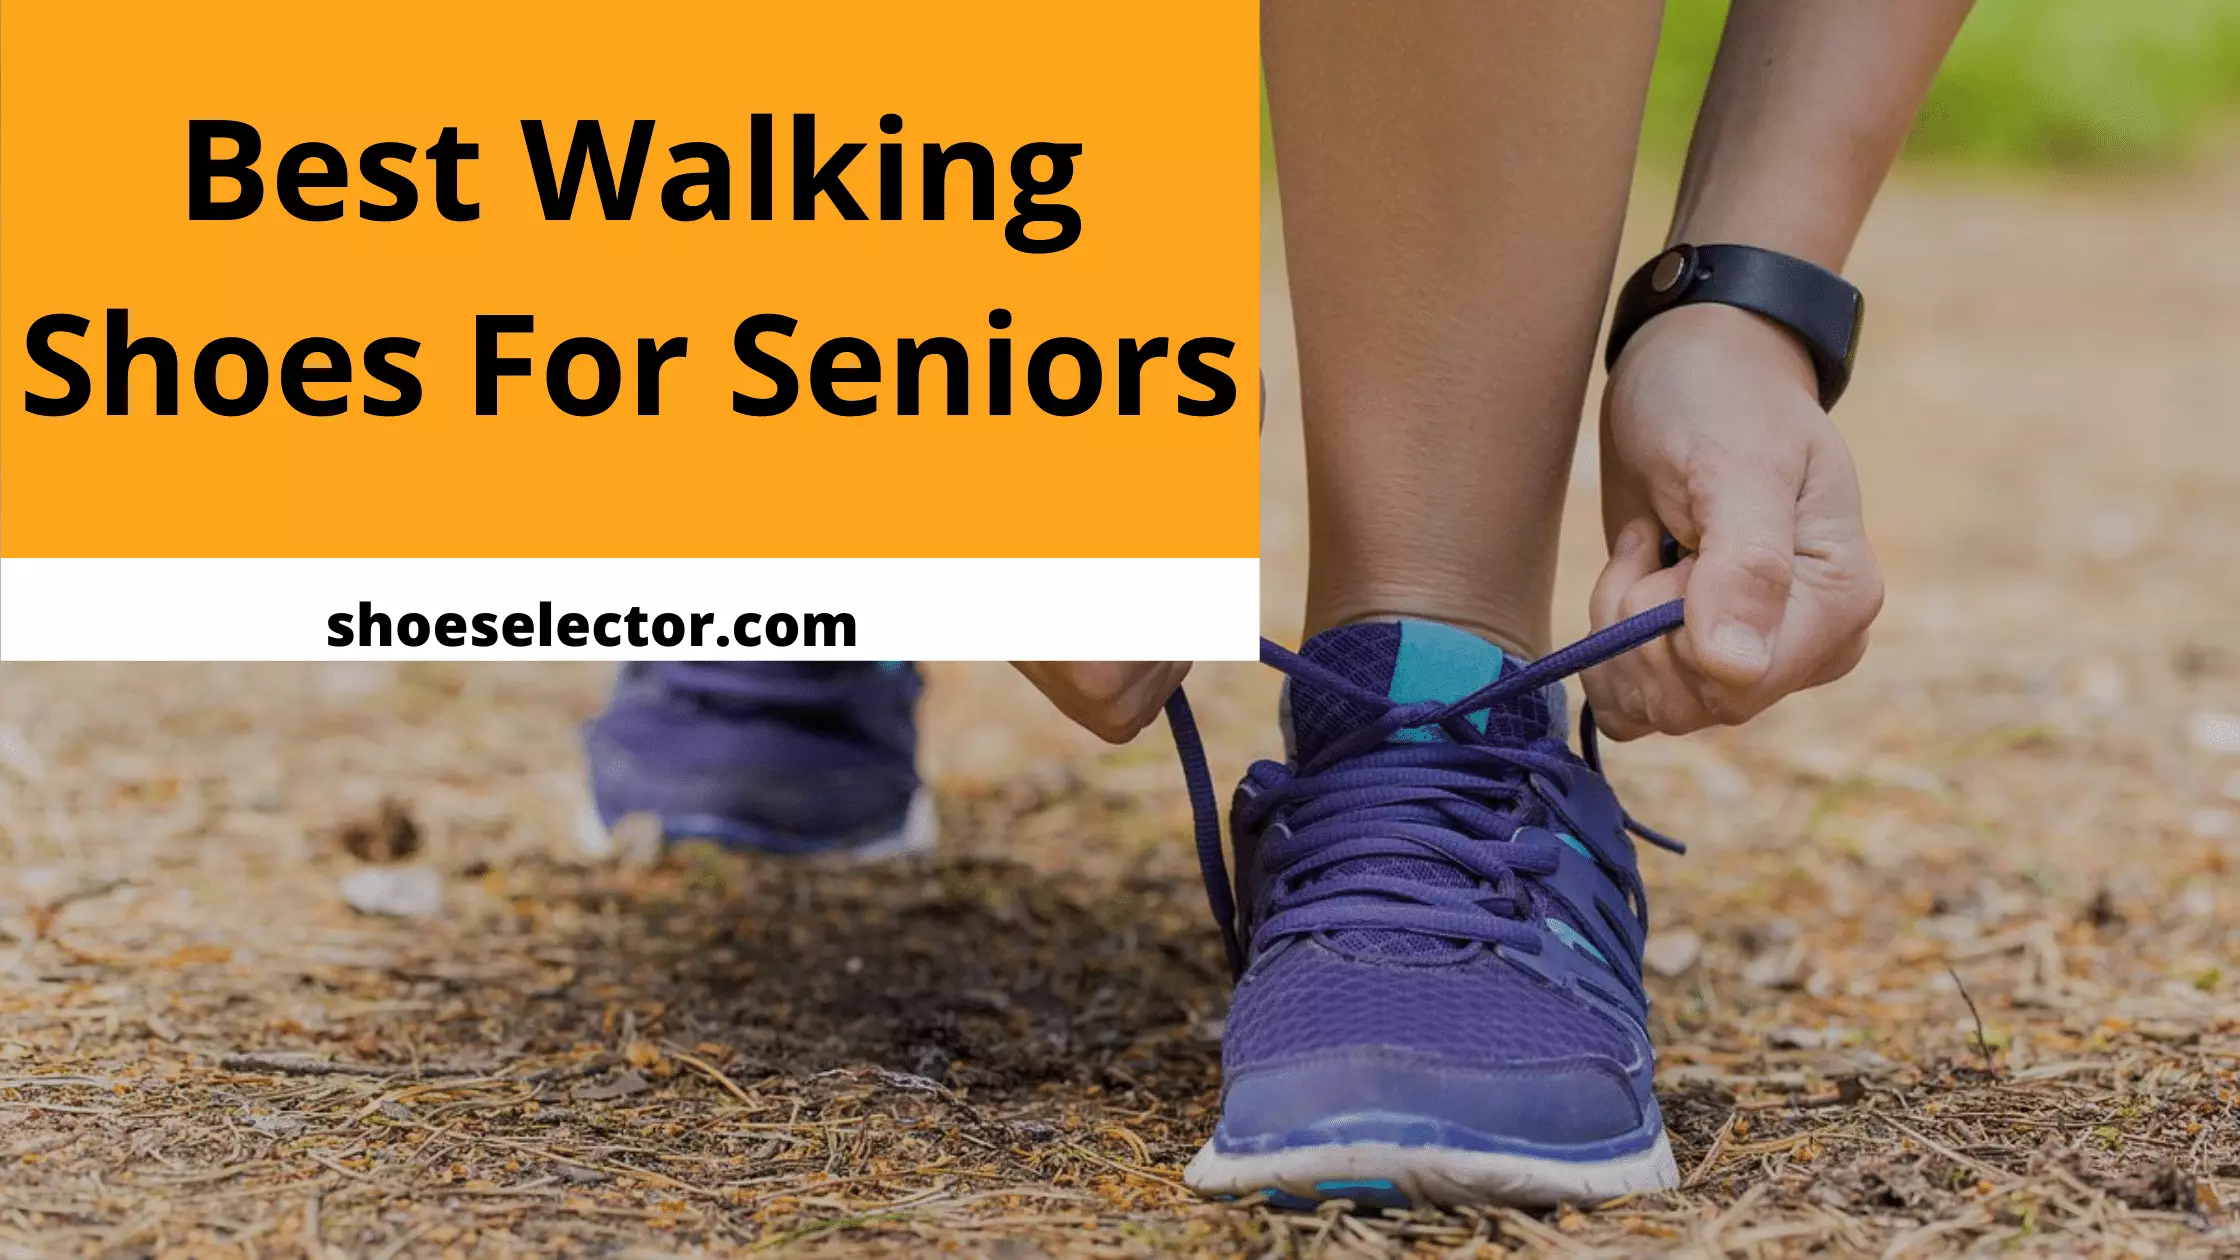 Best Walking Shoes For Seniors - Complete Shopping Tips